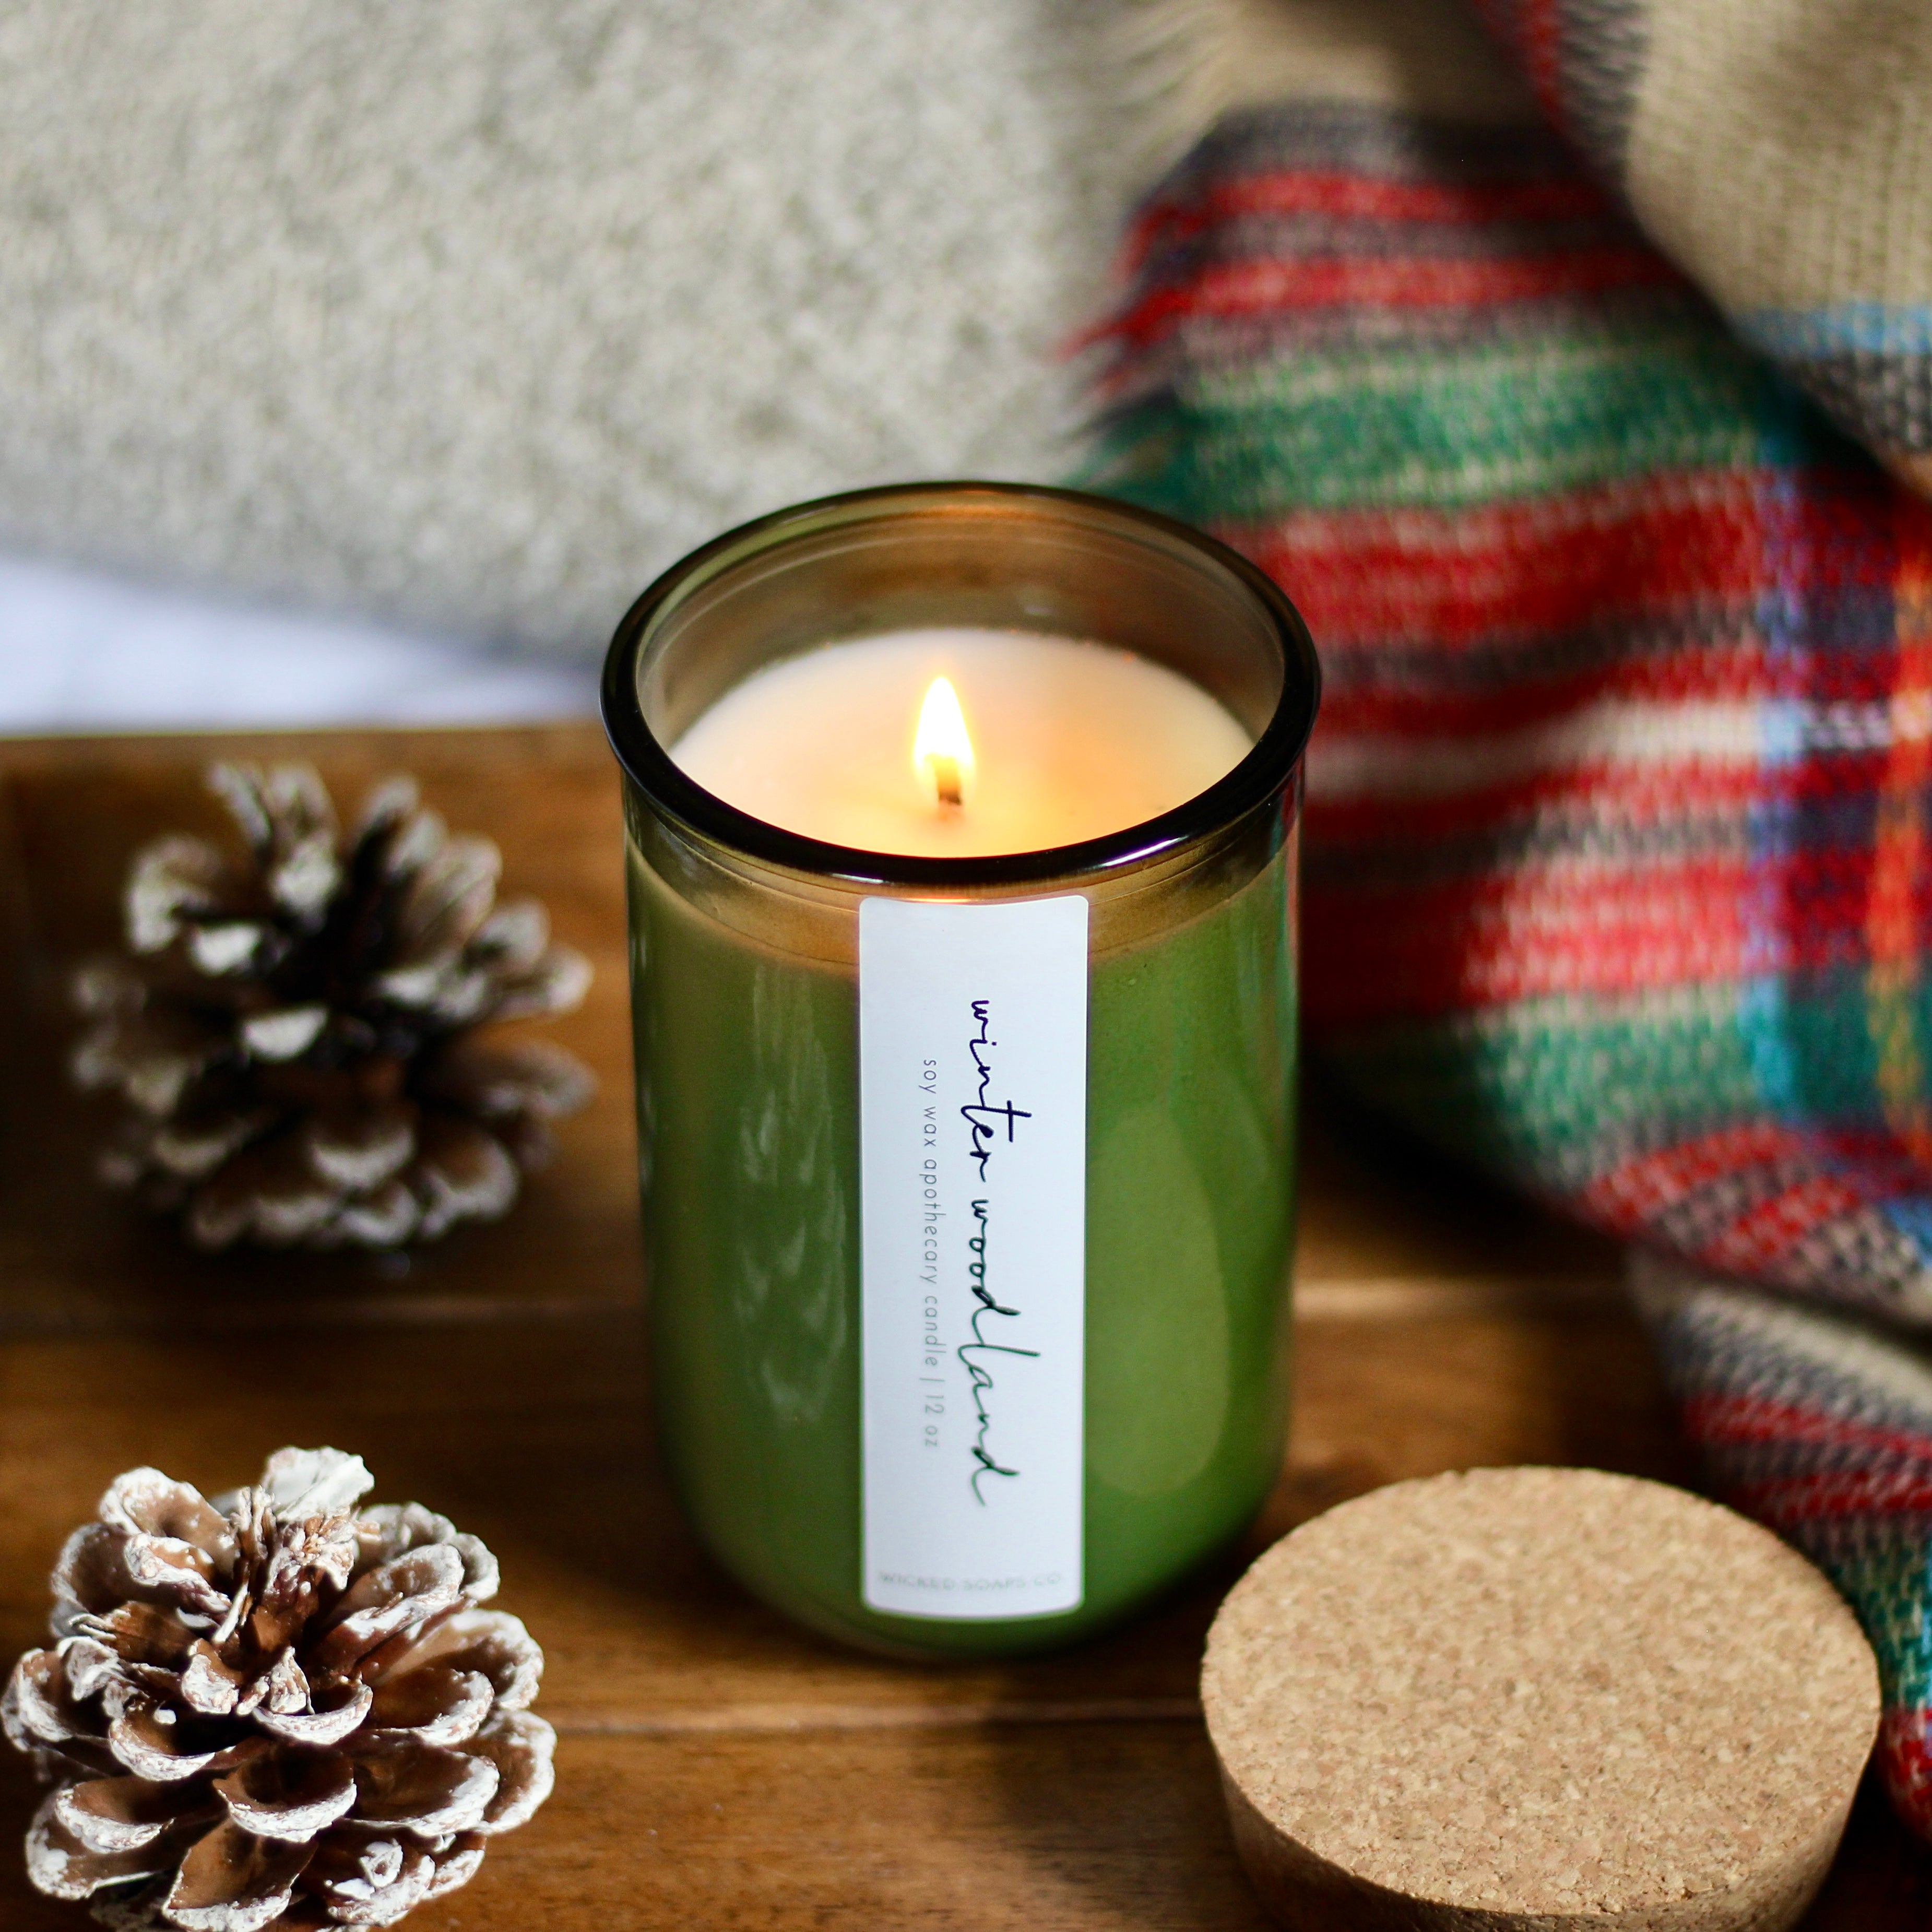 Winter Woodland Apothecary Soy Candle